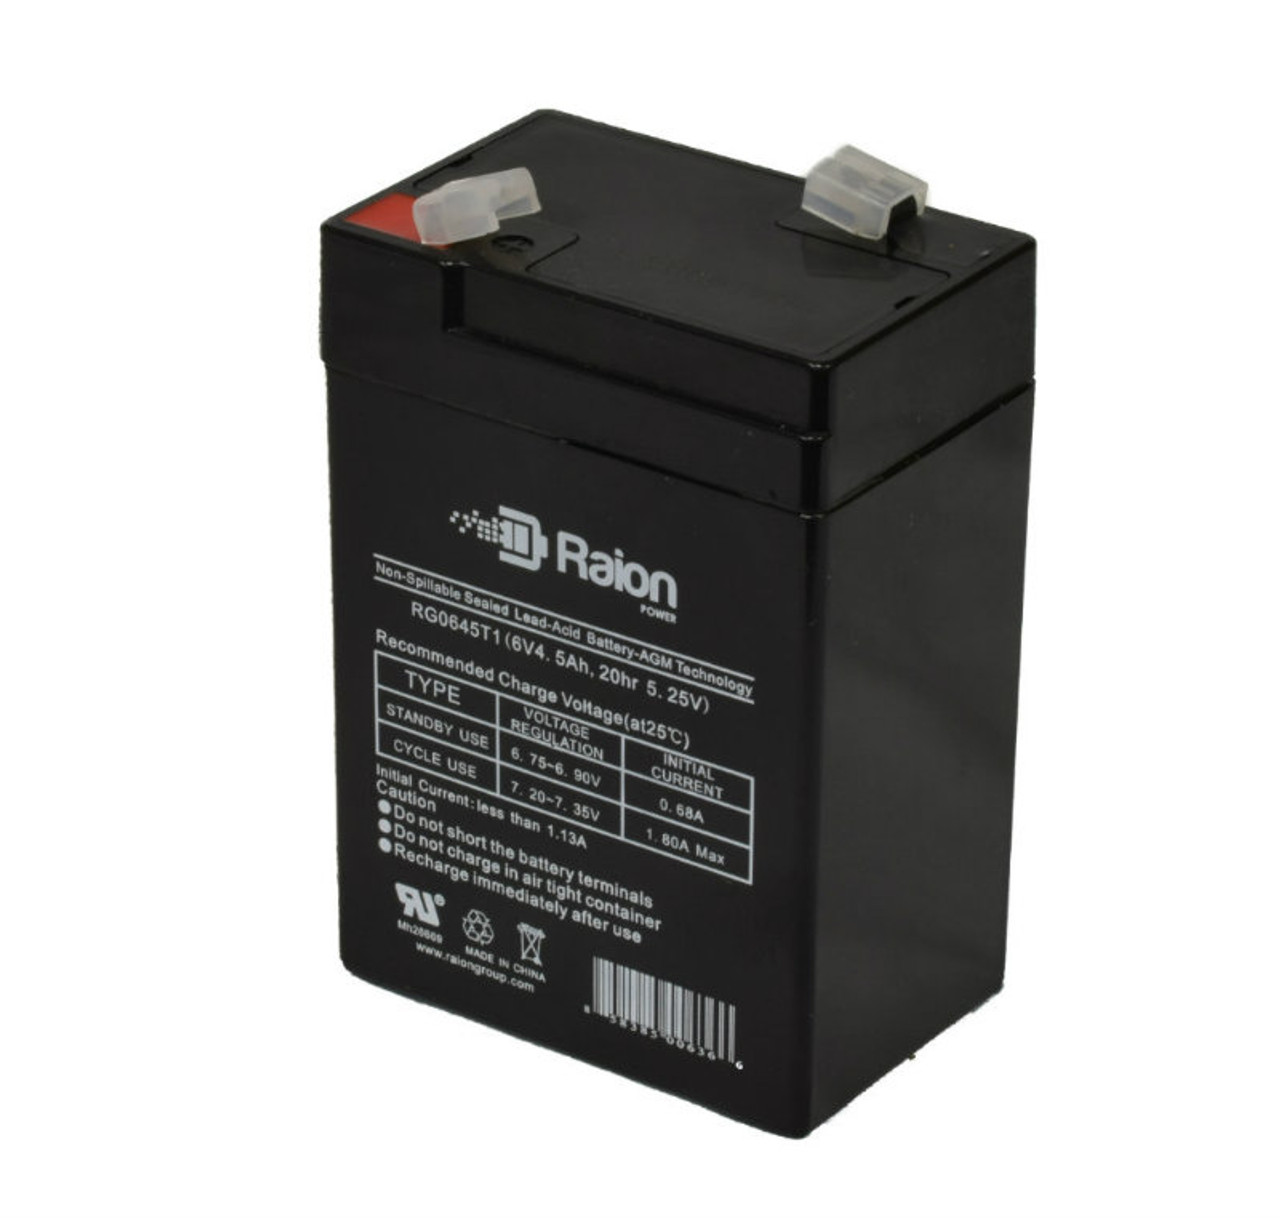 Raion Power RG0645T1 6V 4.5Ah Replacement Battery Cartridge for Dual Lite 0120255